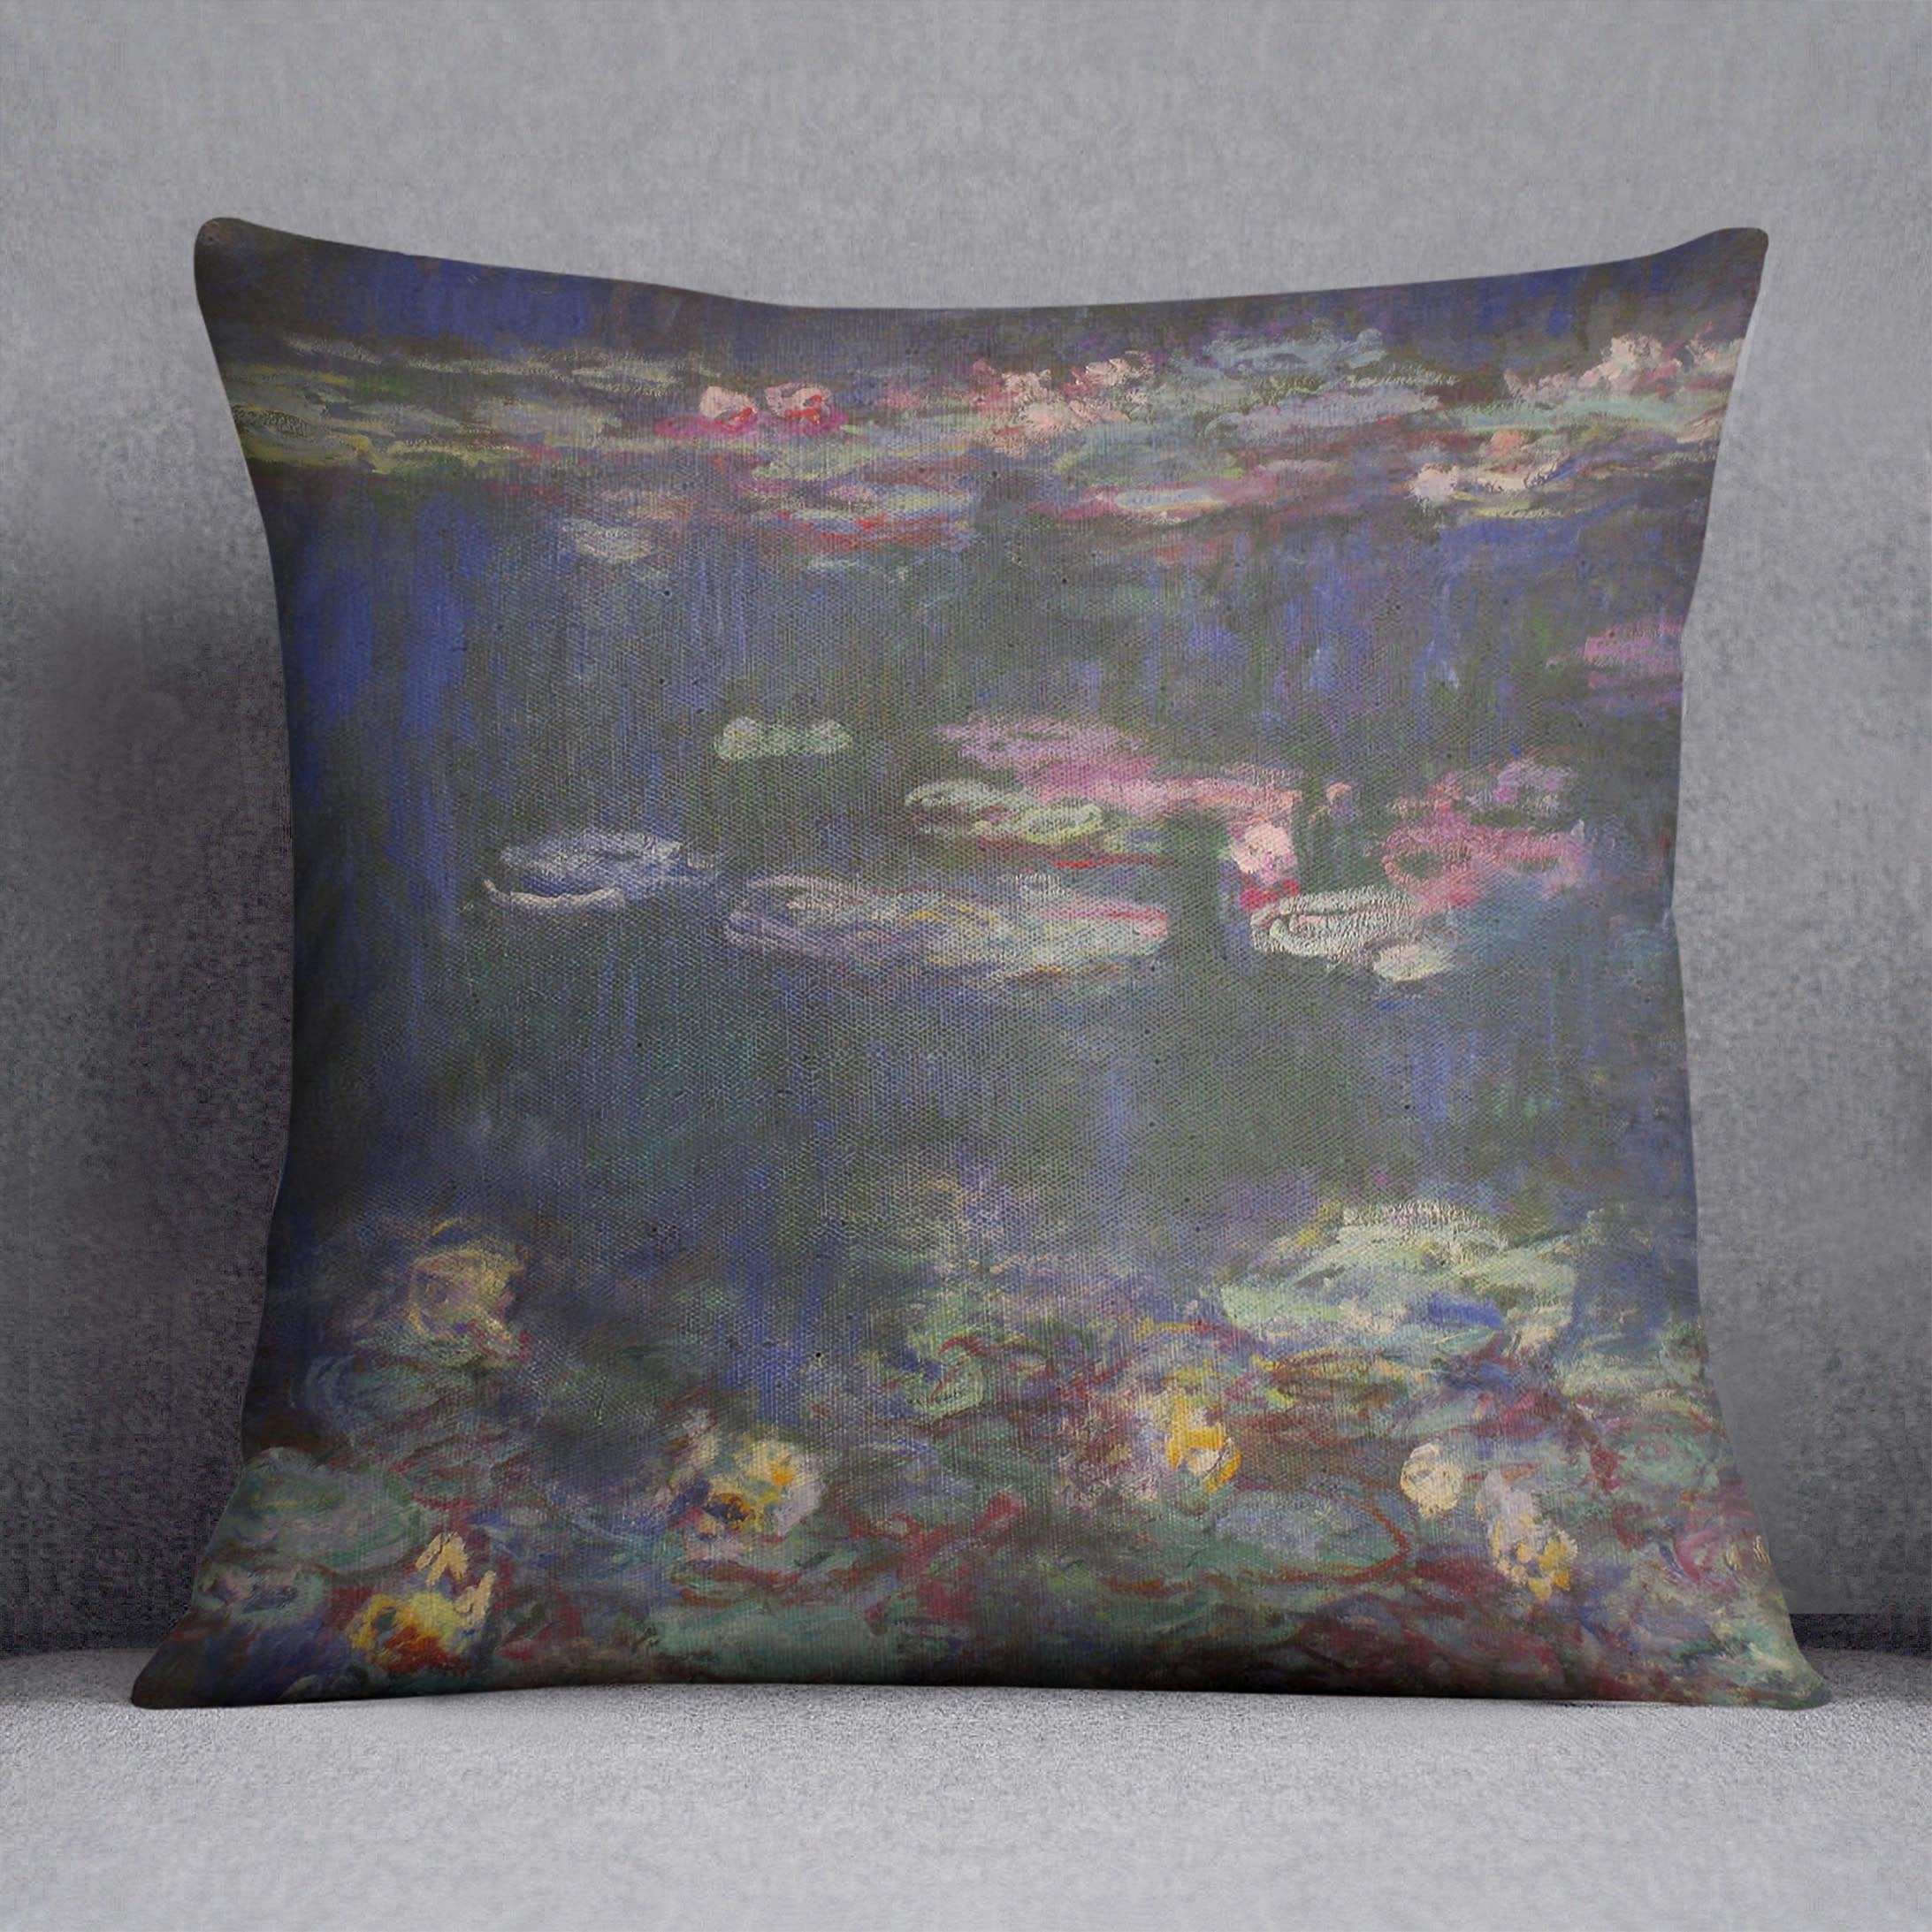 Water Lillies 11 by Monet Throw Pillow